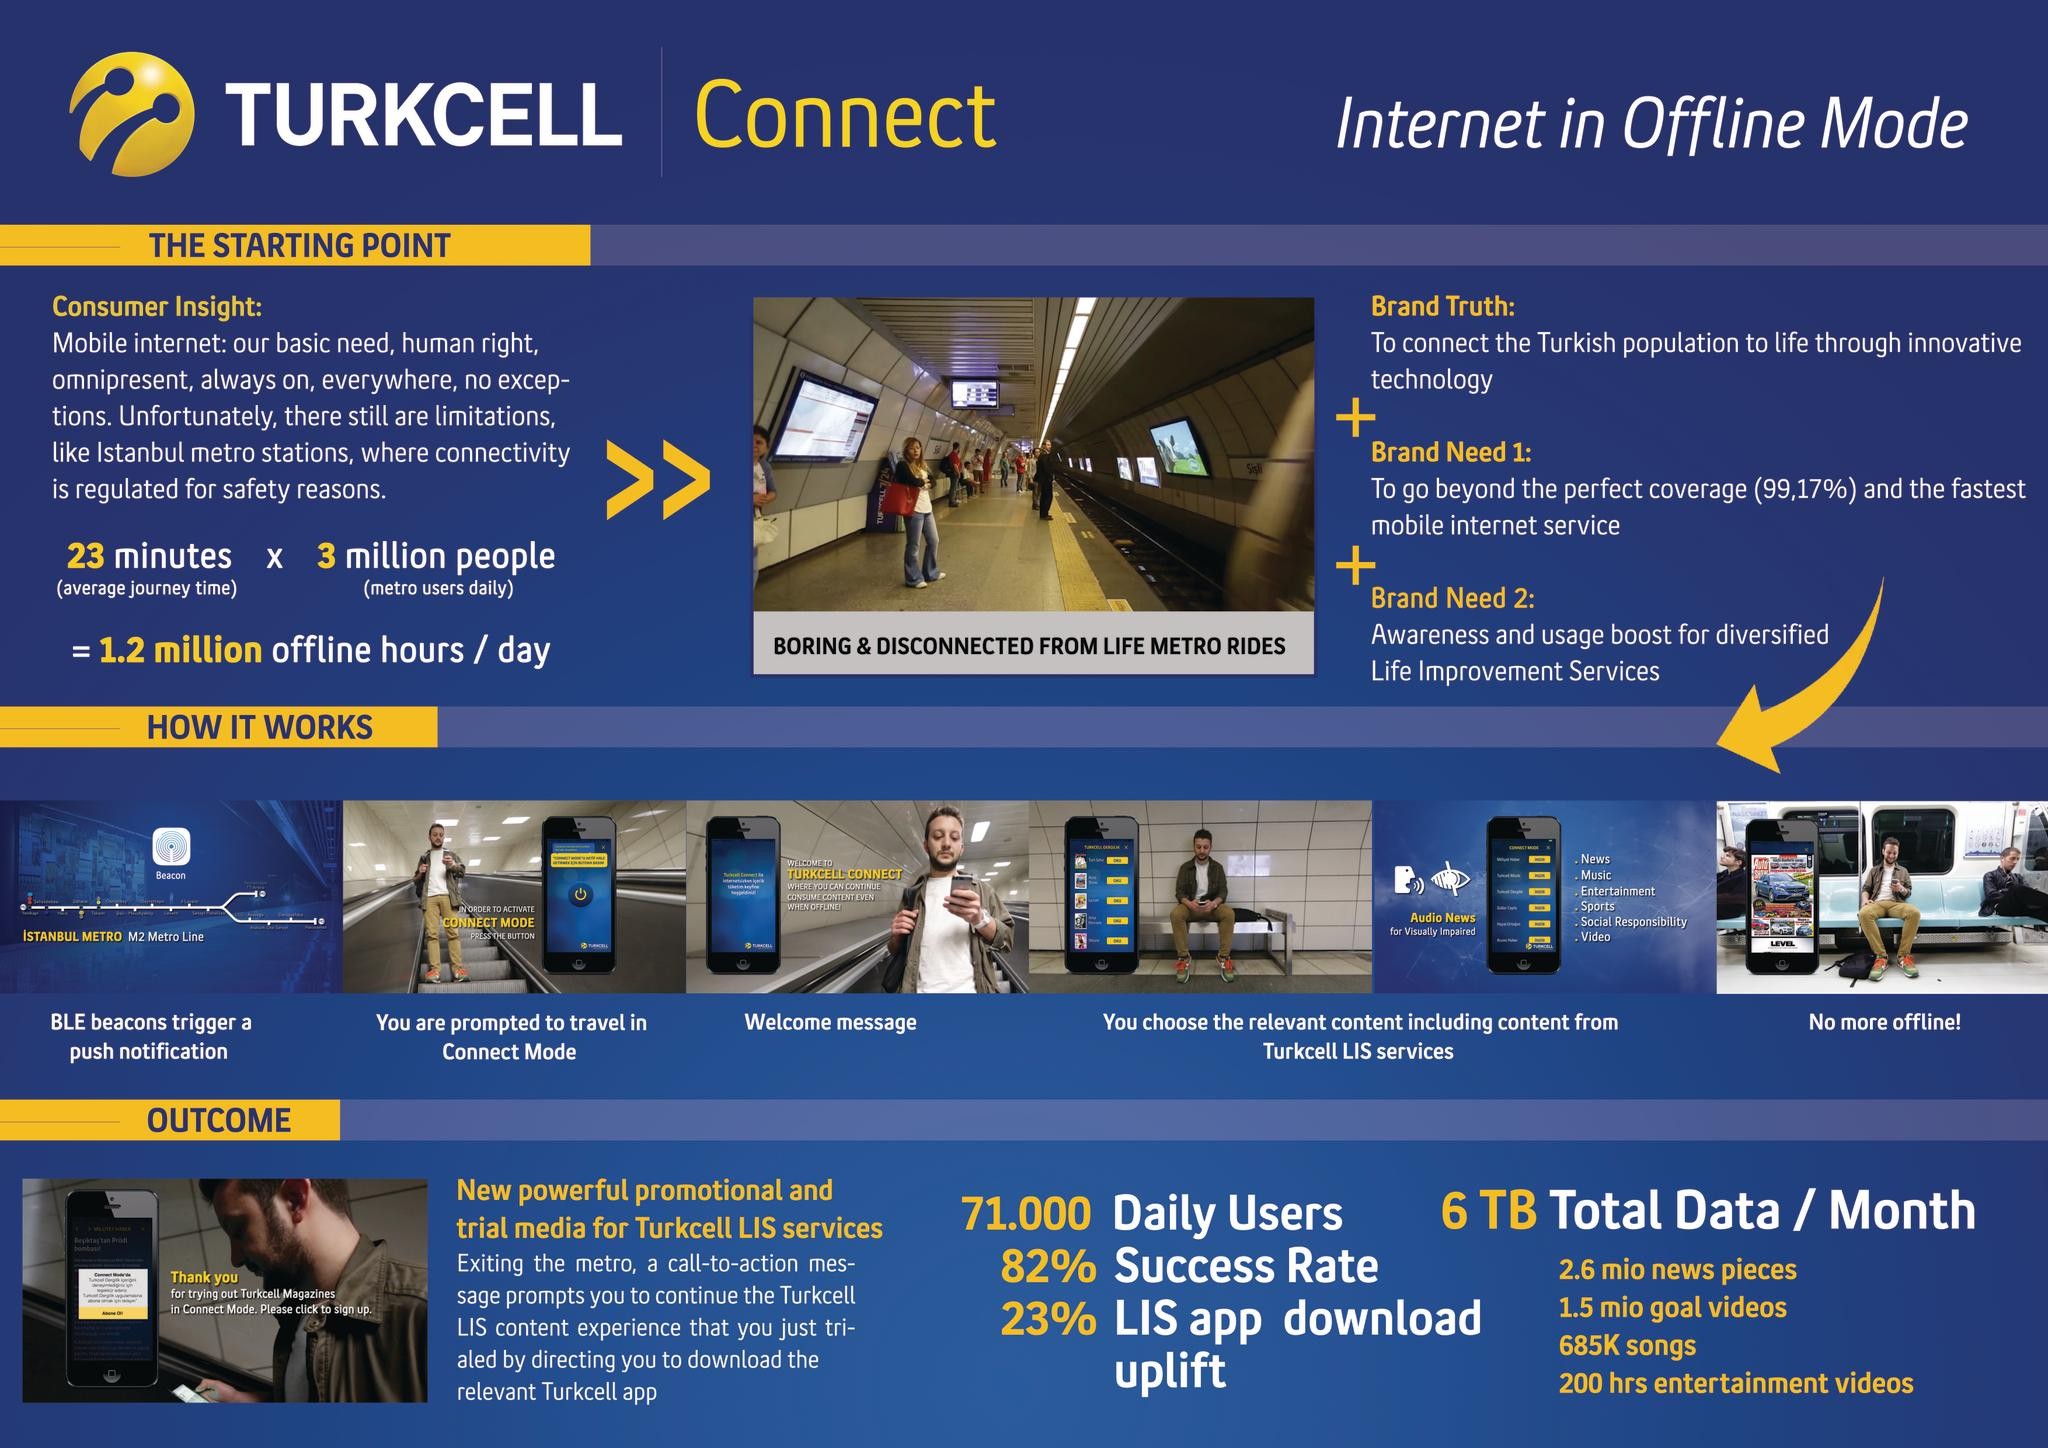 TURKCELL CONNECT: INTERNET IN OFFLINE MODE